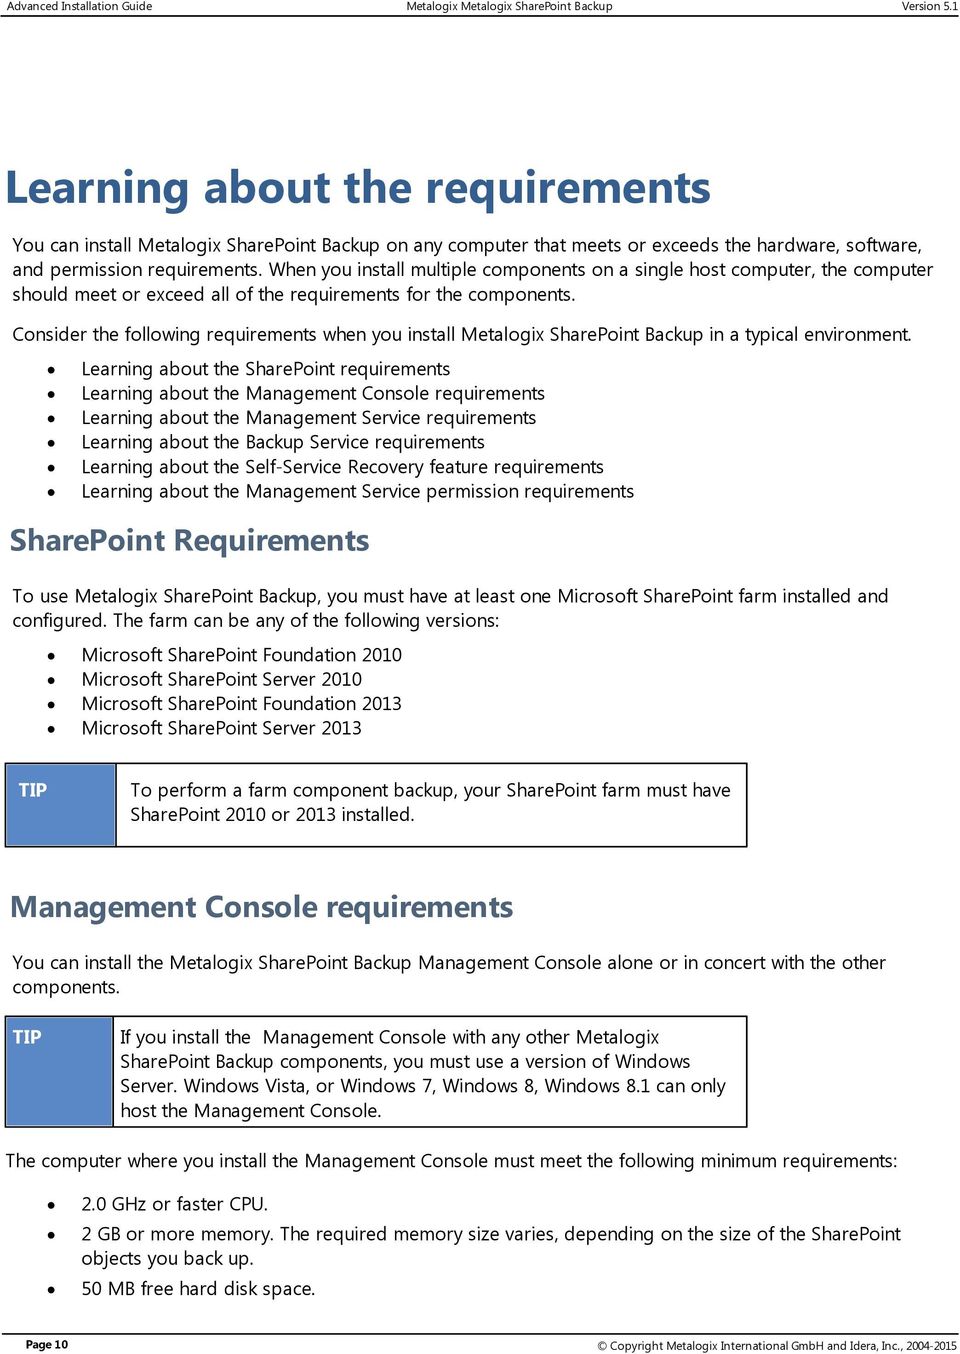 Consider the following requirements when you install Metalogix SharePoint Backup in a typical environment.